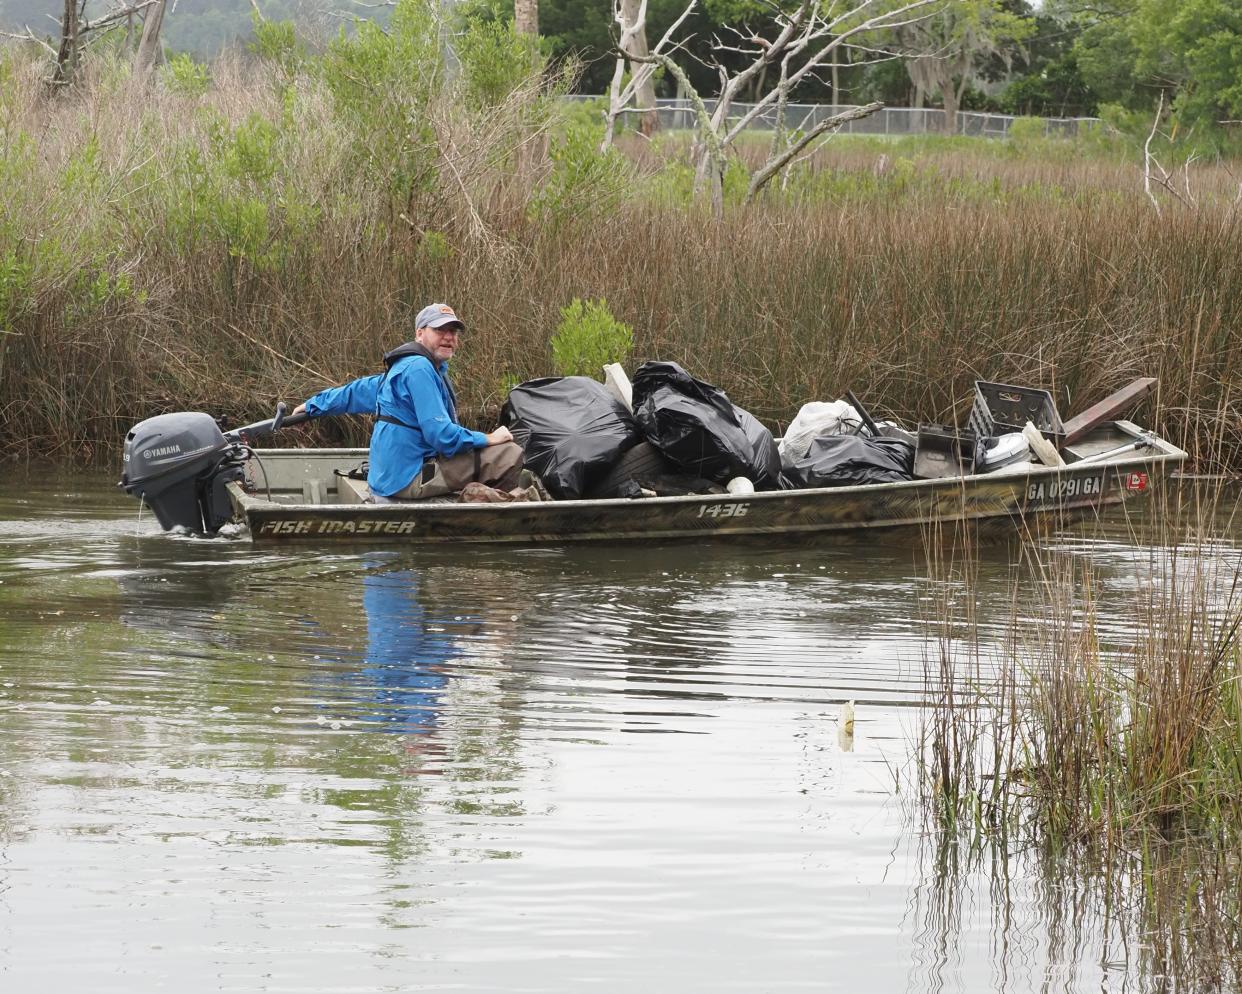 Ogeechee Riverkeeper Damon Mullis participates in a litter clean-up on the Vernon River. While litter is not a usual feature of a watershed management plan, the updated Vernon River plan includes litter collection and monitoring as part of the water quality issues.